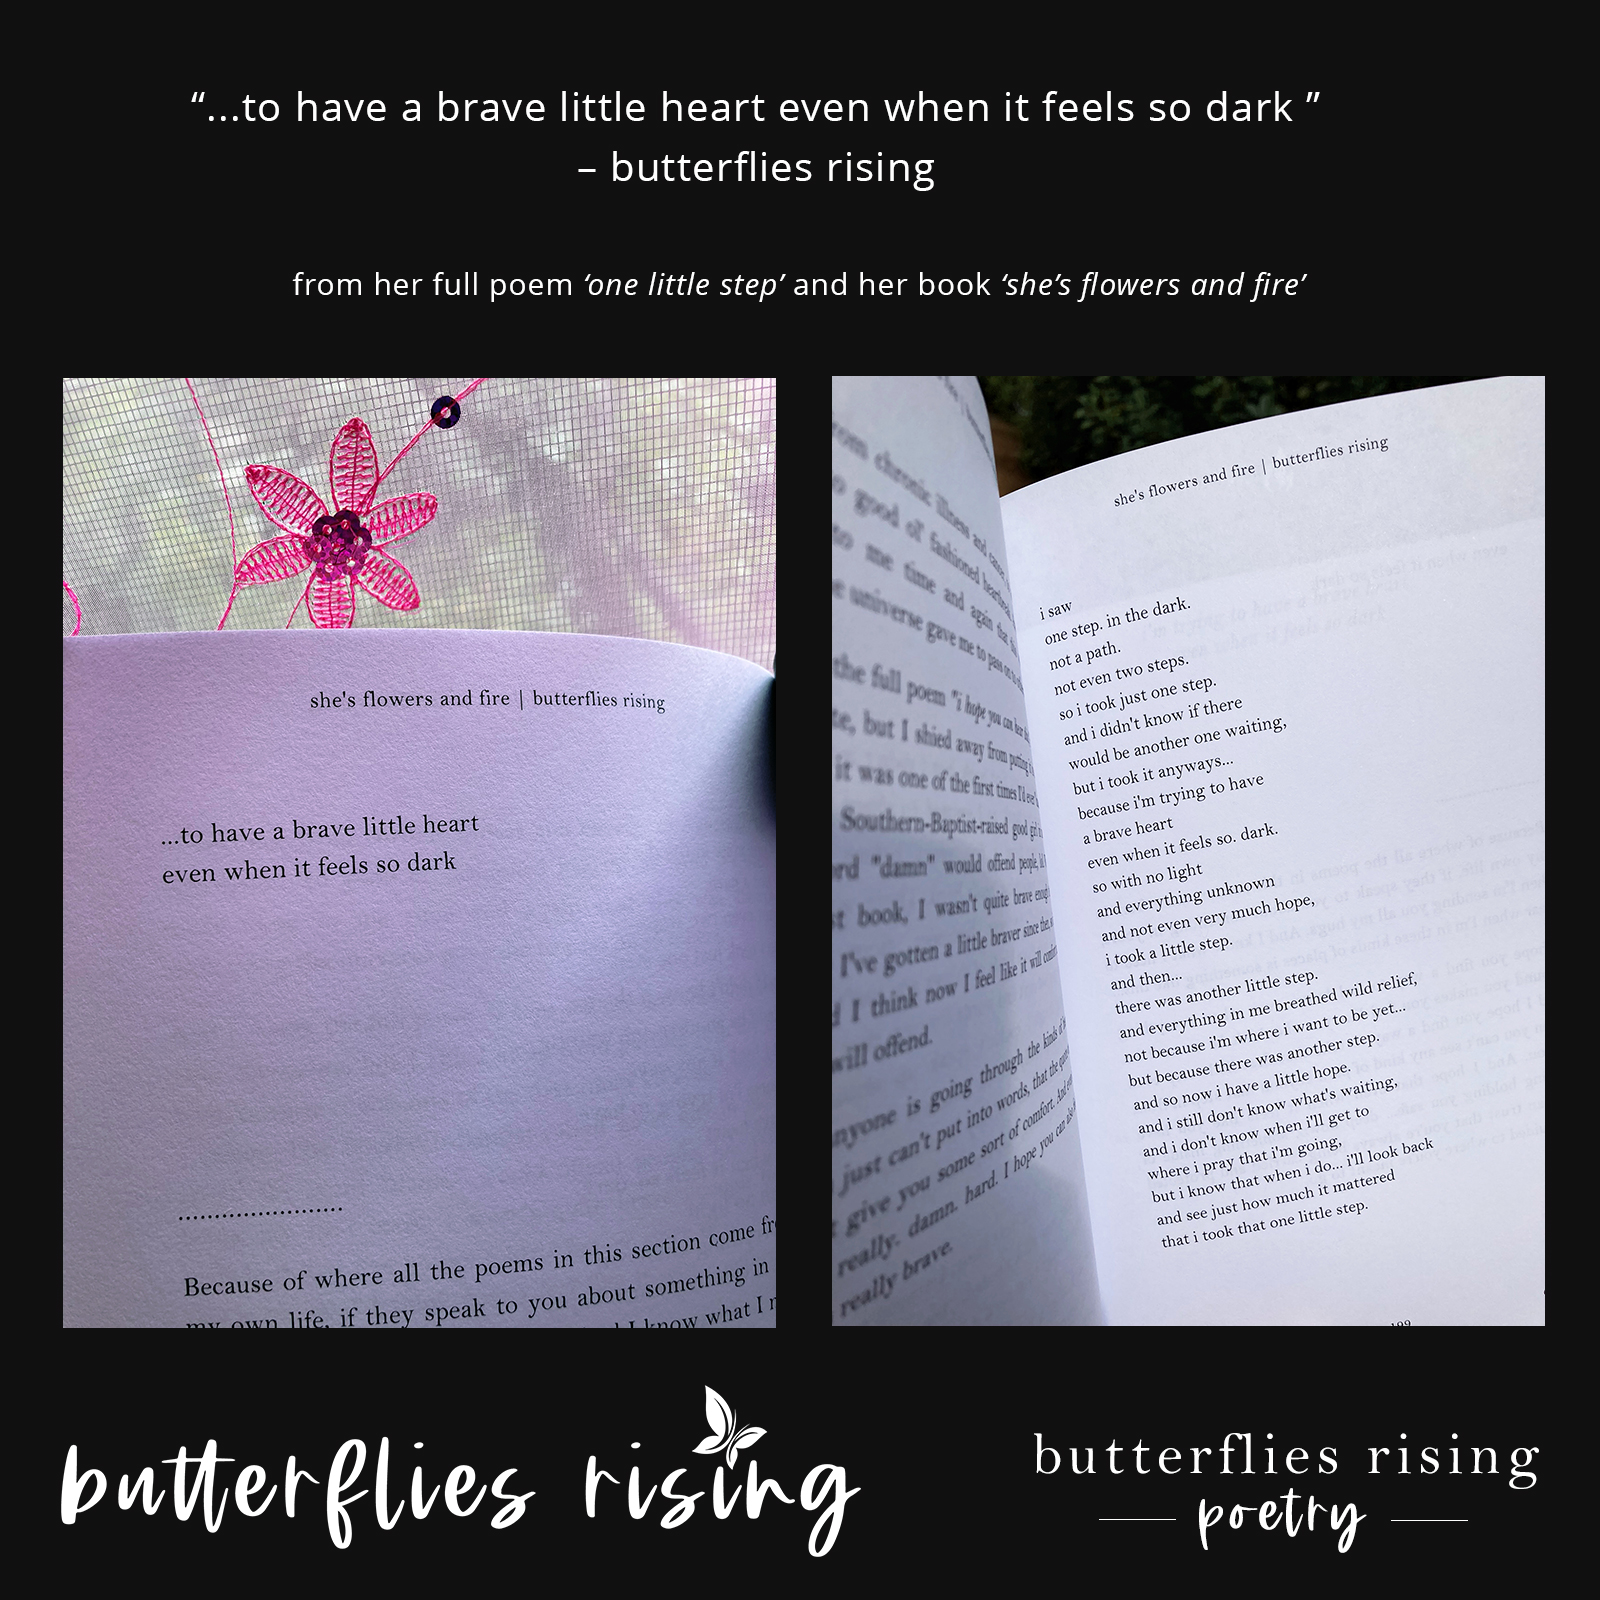 ...to have a brave little heart even when it feels so dark - butterflies rising